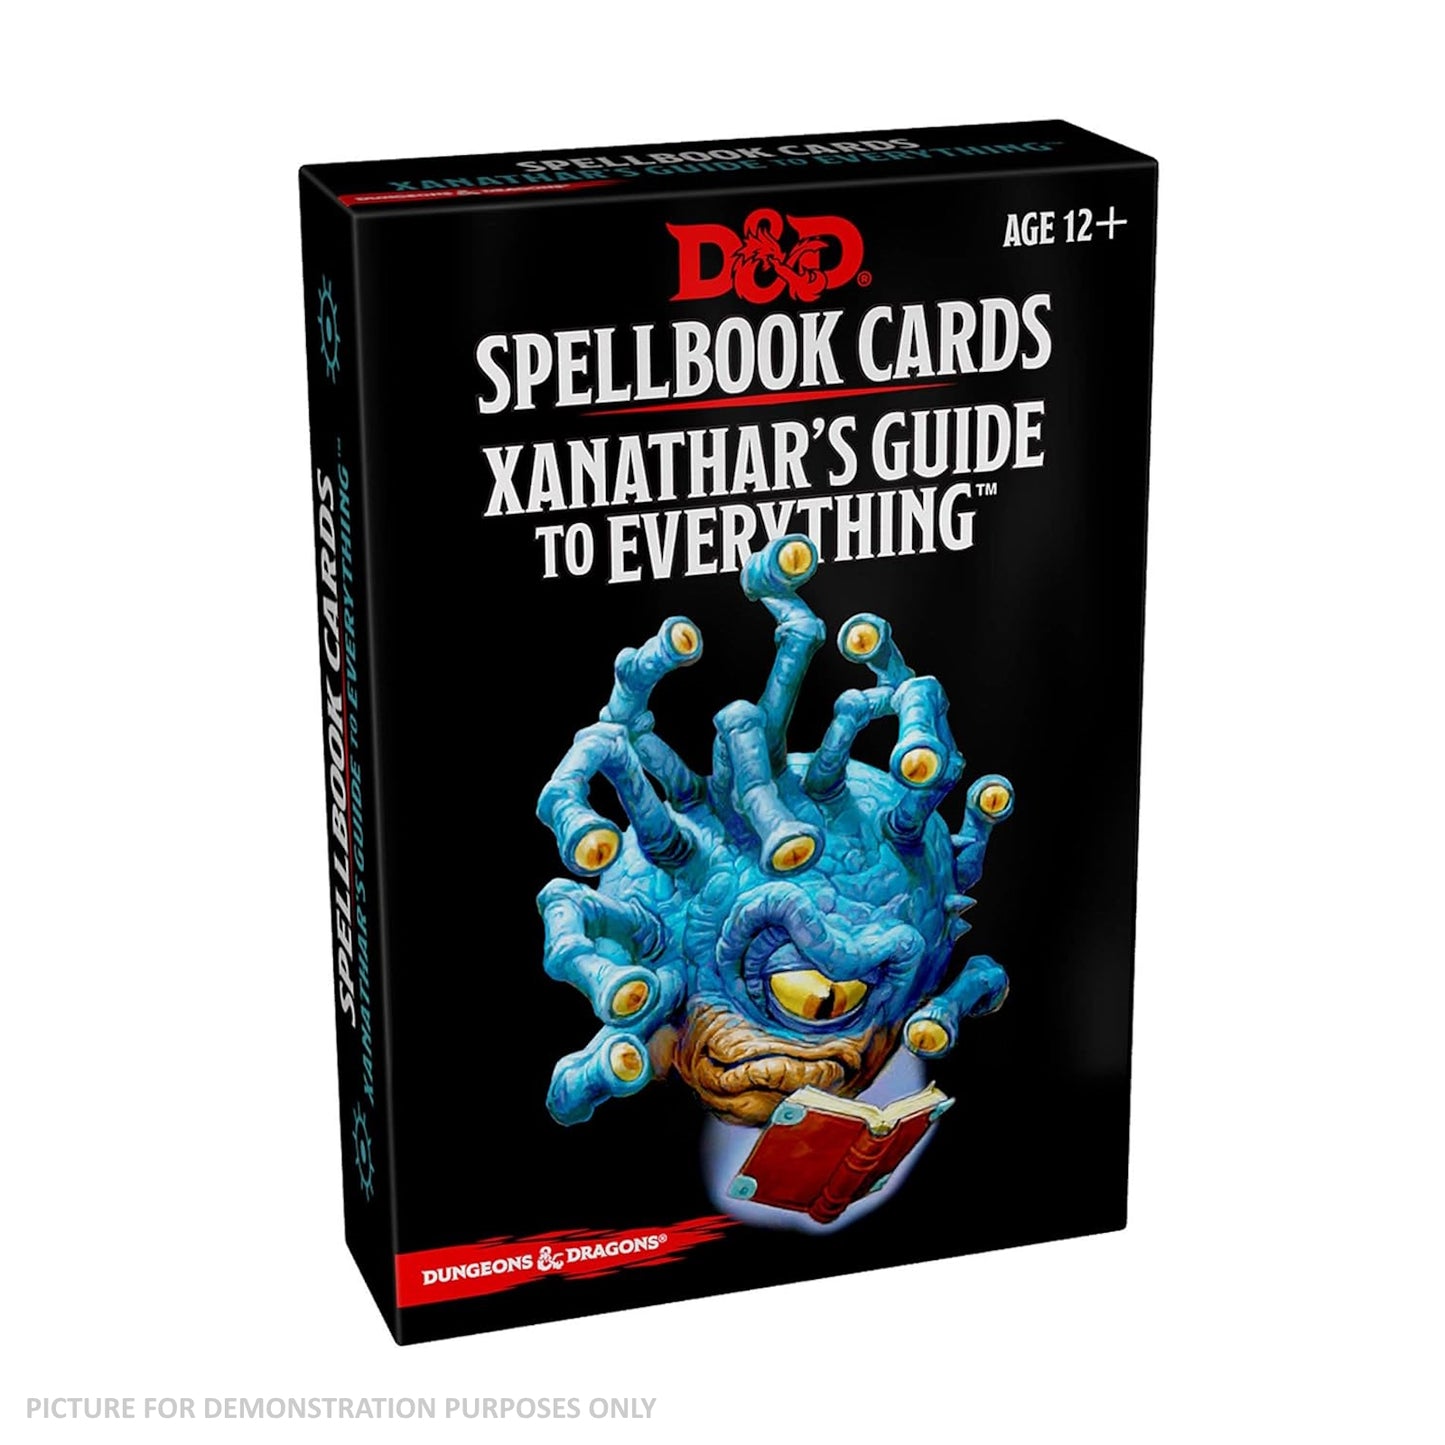 Dungeons & Dragons Spellbook Cards Xanathars Deck 2018 Edition